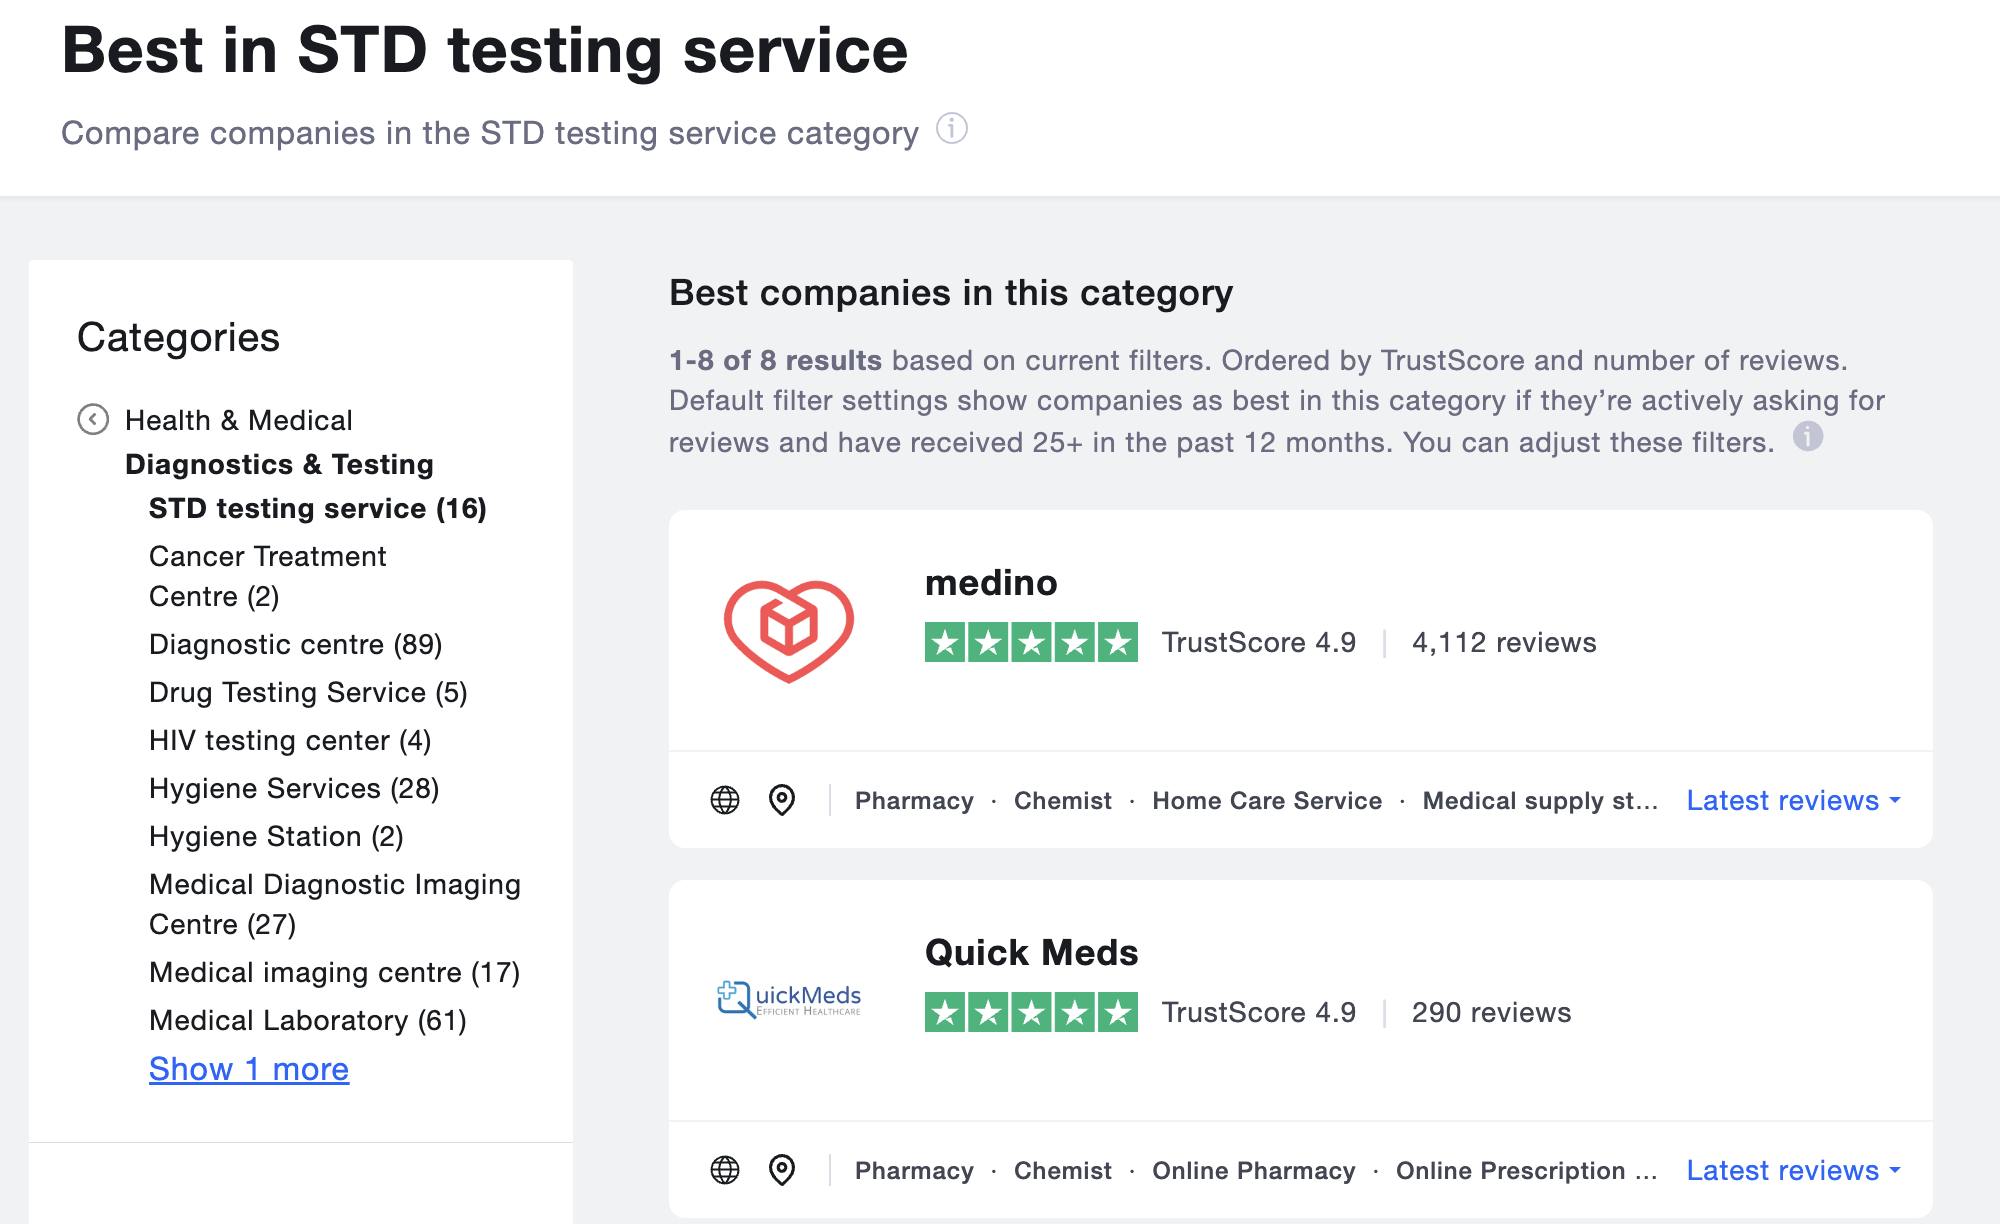 Image of medino ranking position 1 on Trustpilot in the STD Testing services category